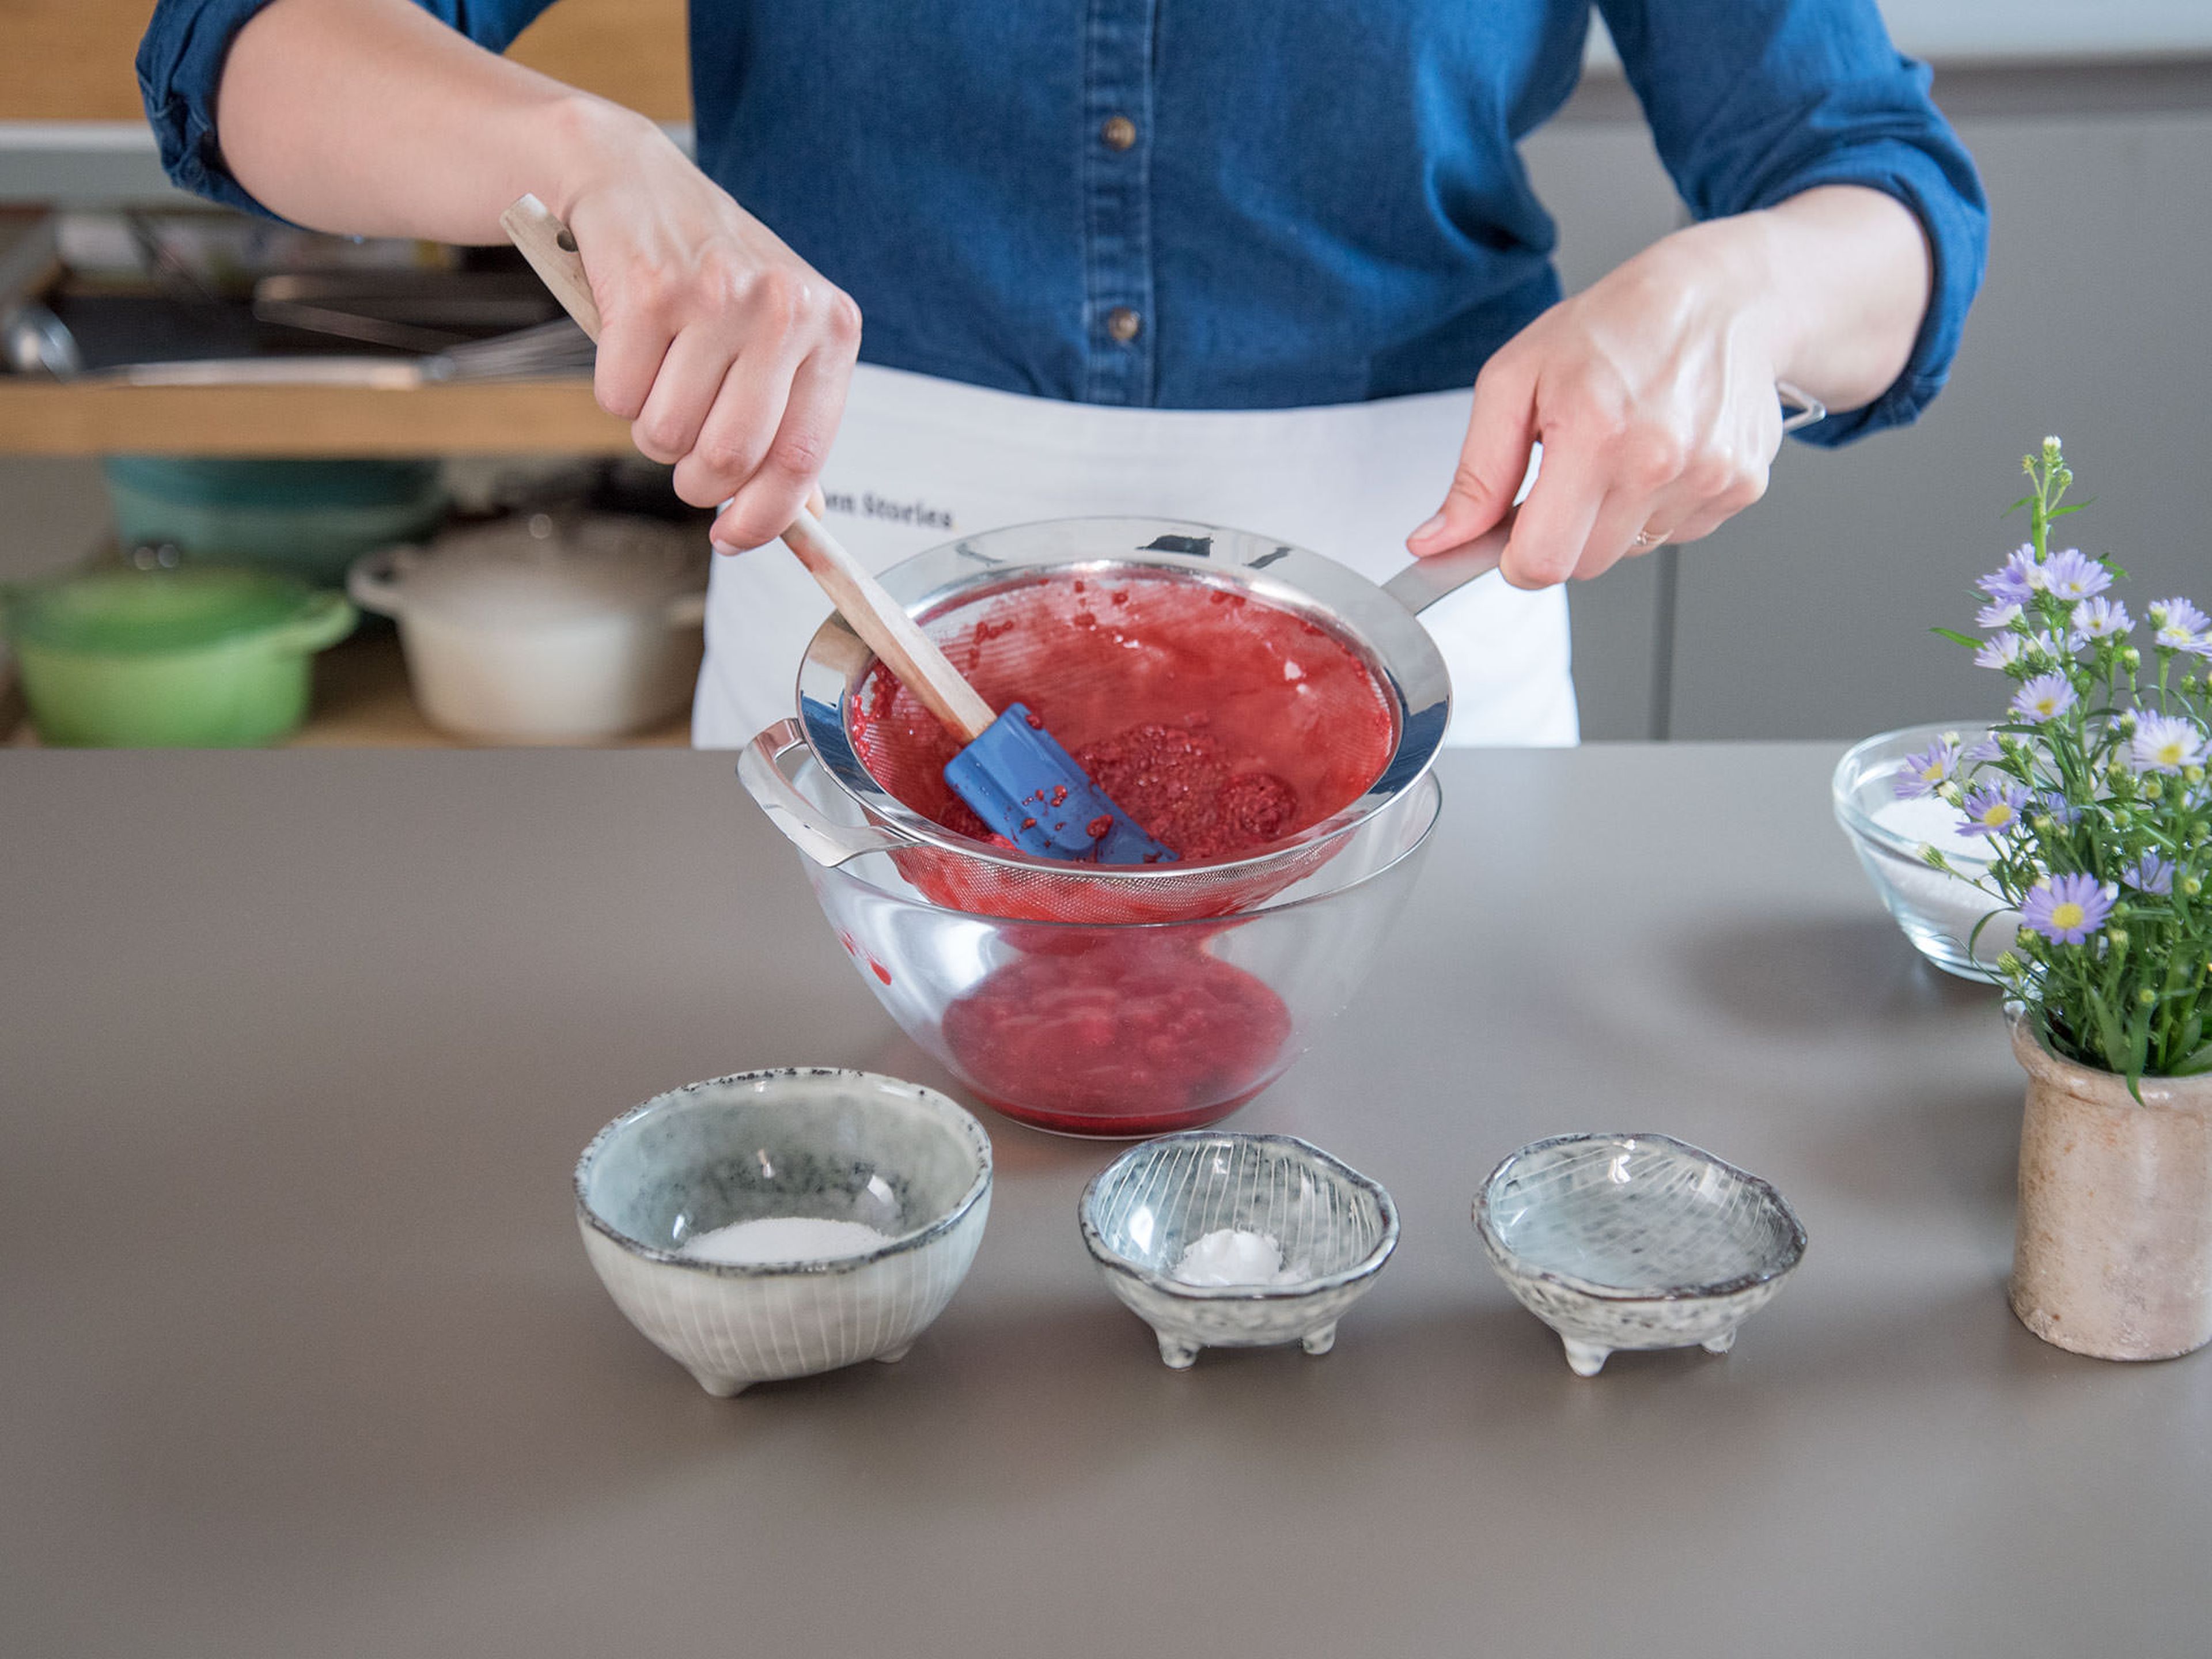 Thaw frozen raspberries in a fine sieve set over a bowl. Press raspberries through sieve to extract juice. Transfer juice (approx. 125 g/4.5 oz.) to a small saucepan and warm over low heat.